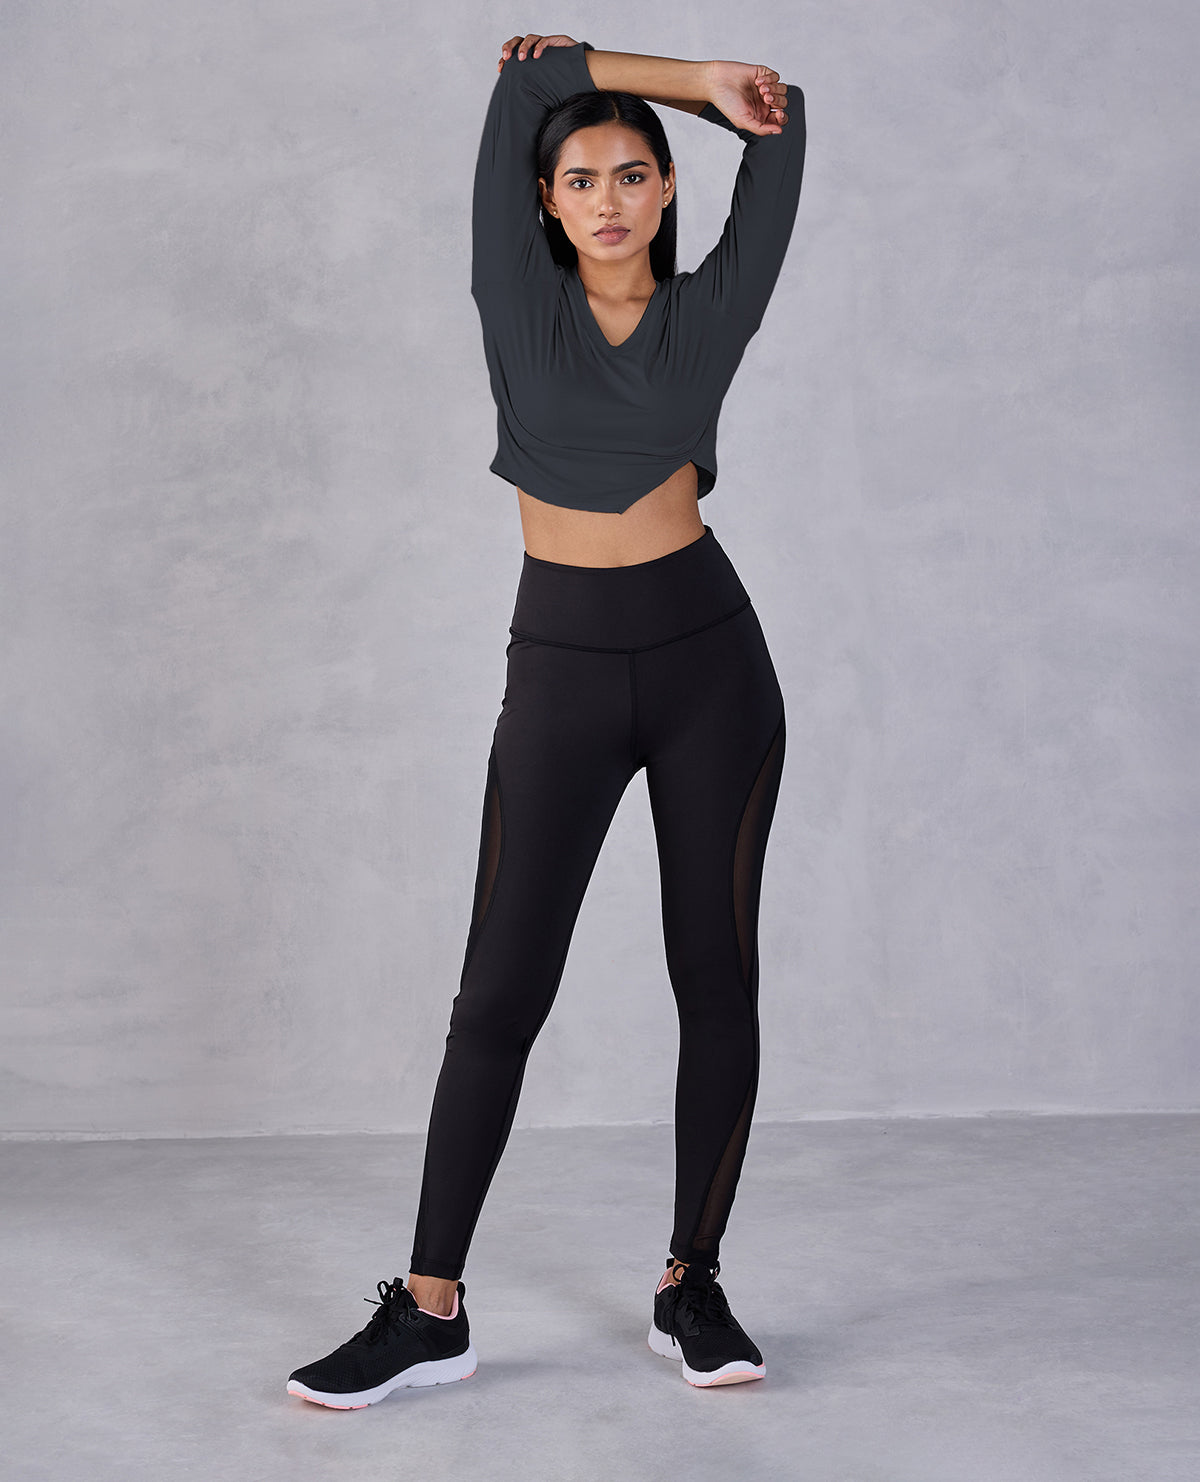 Bottomwear Kica Active  High Waisted Leggings In Second Skn Fabric ⋆  Timelesswearshop